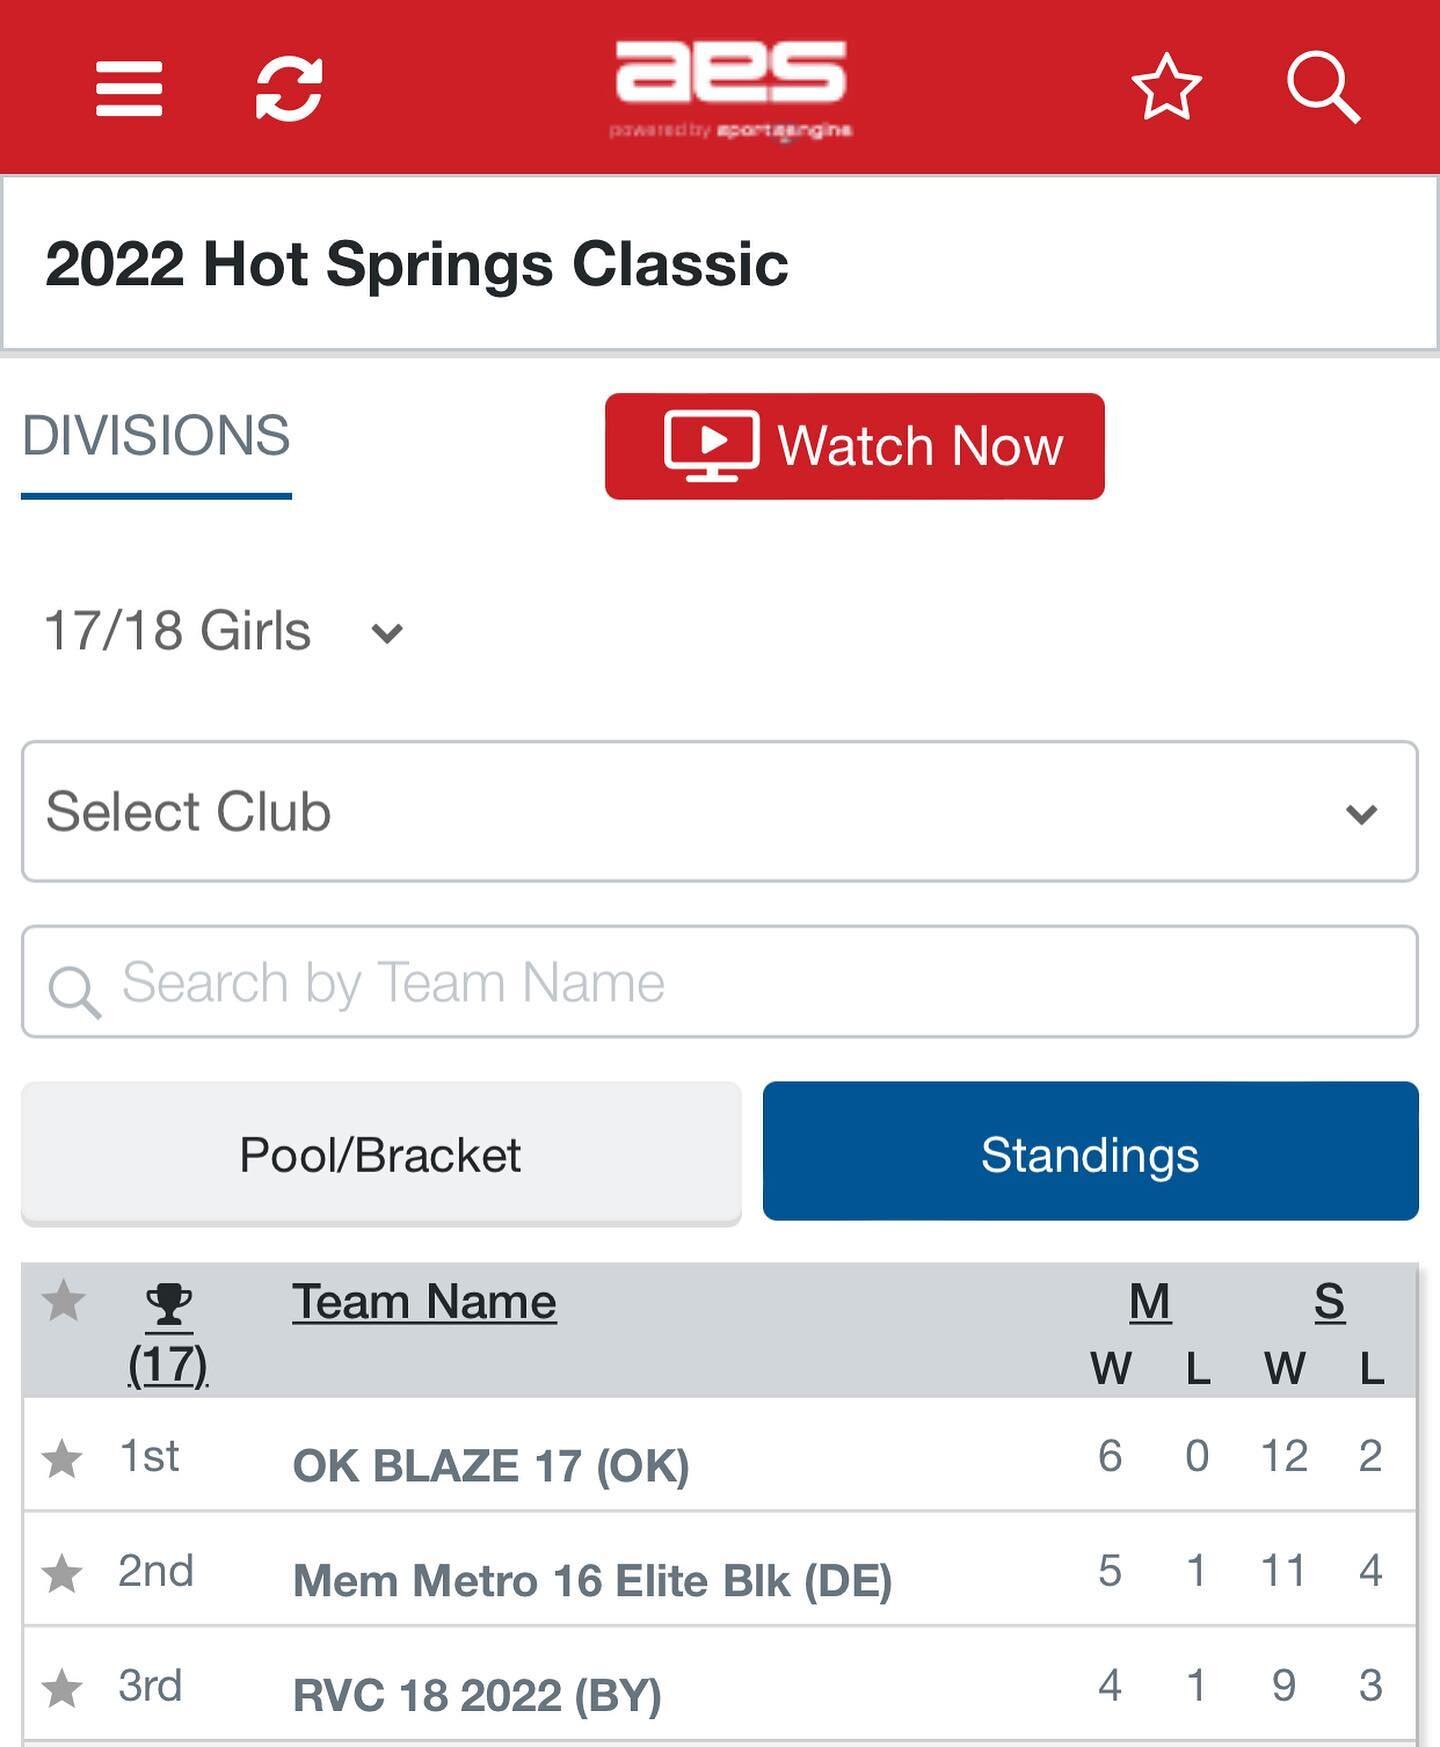 Hey Hey! 18s! We see you! Third place overall in the Hot Springs Classic 2022! 🙌❤️🏐💙🔥🏆👊💪